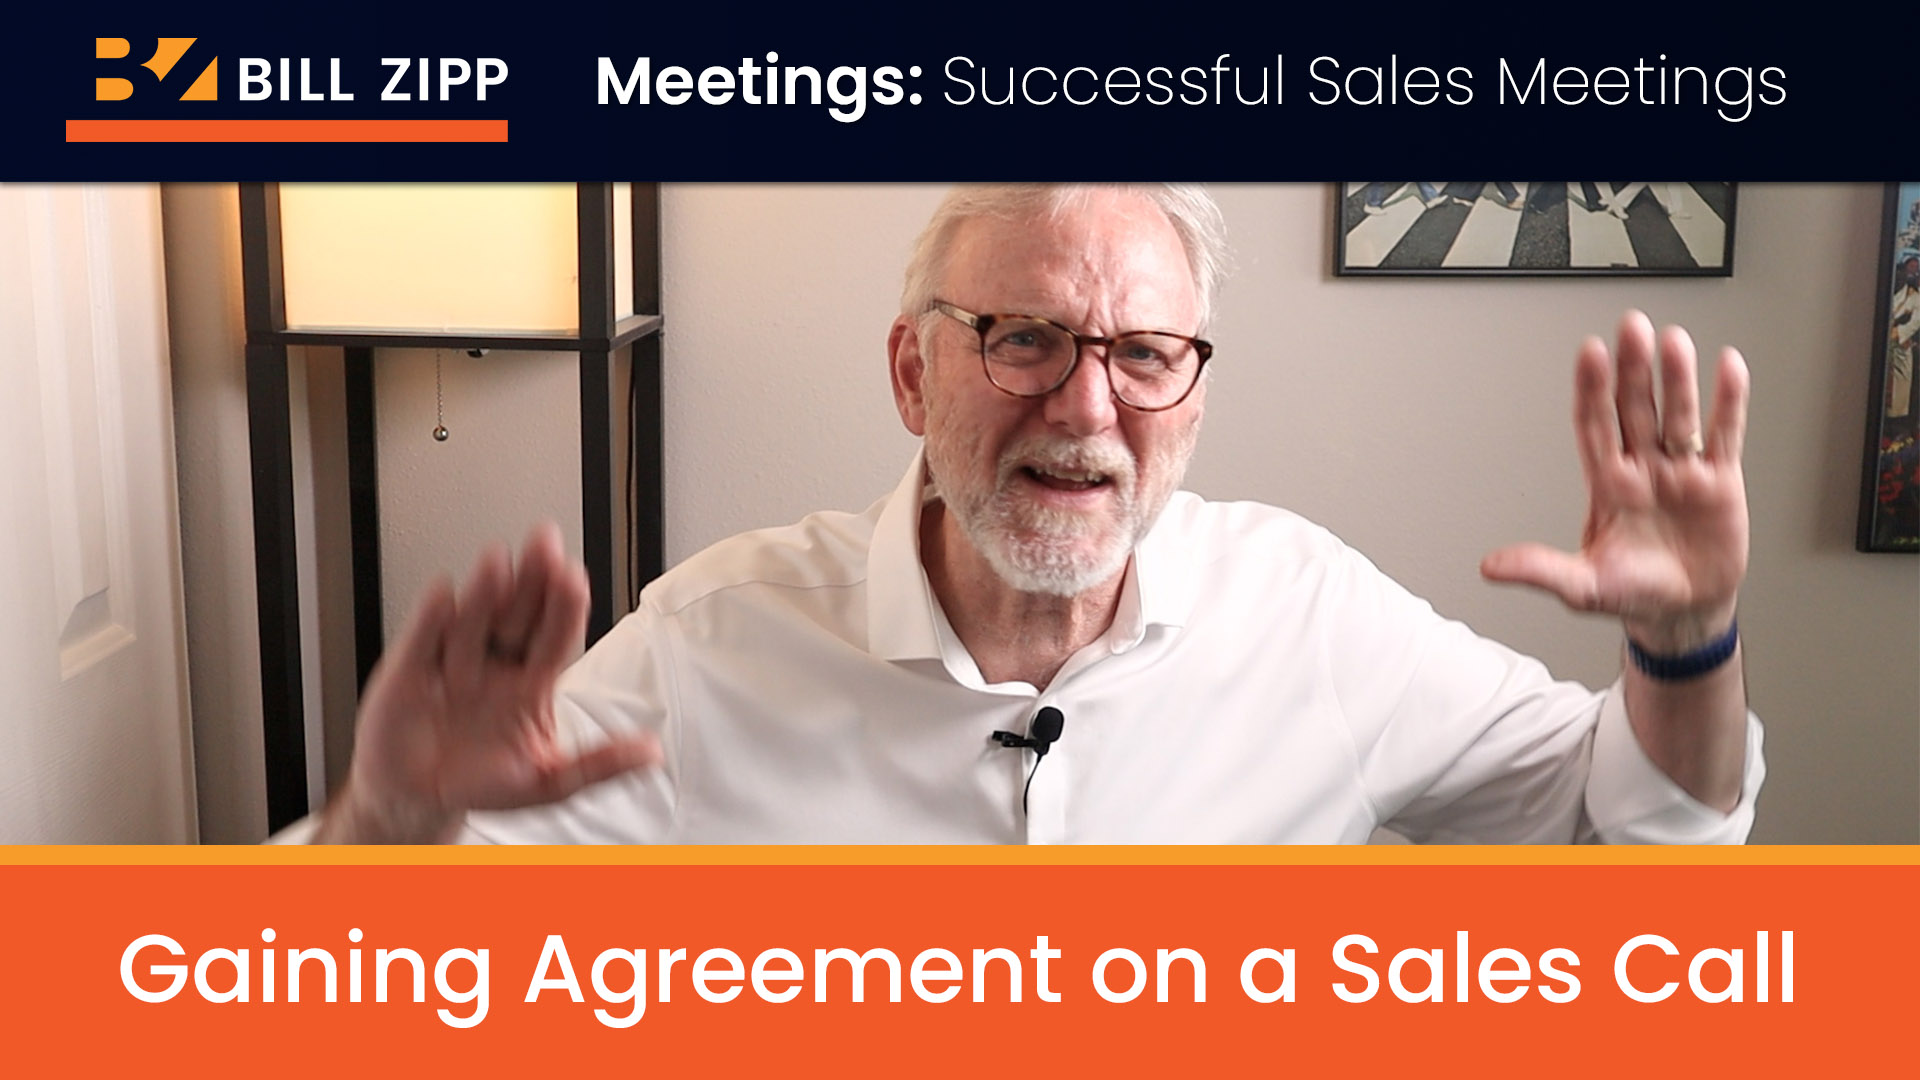 Gaining Agreement on a Sales Call: How to Use an Upfront Contract